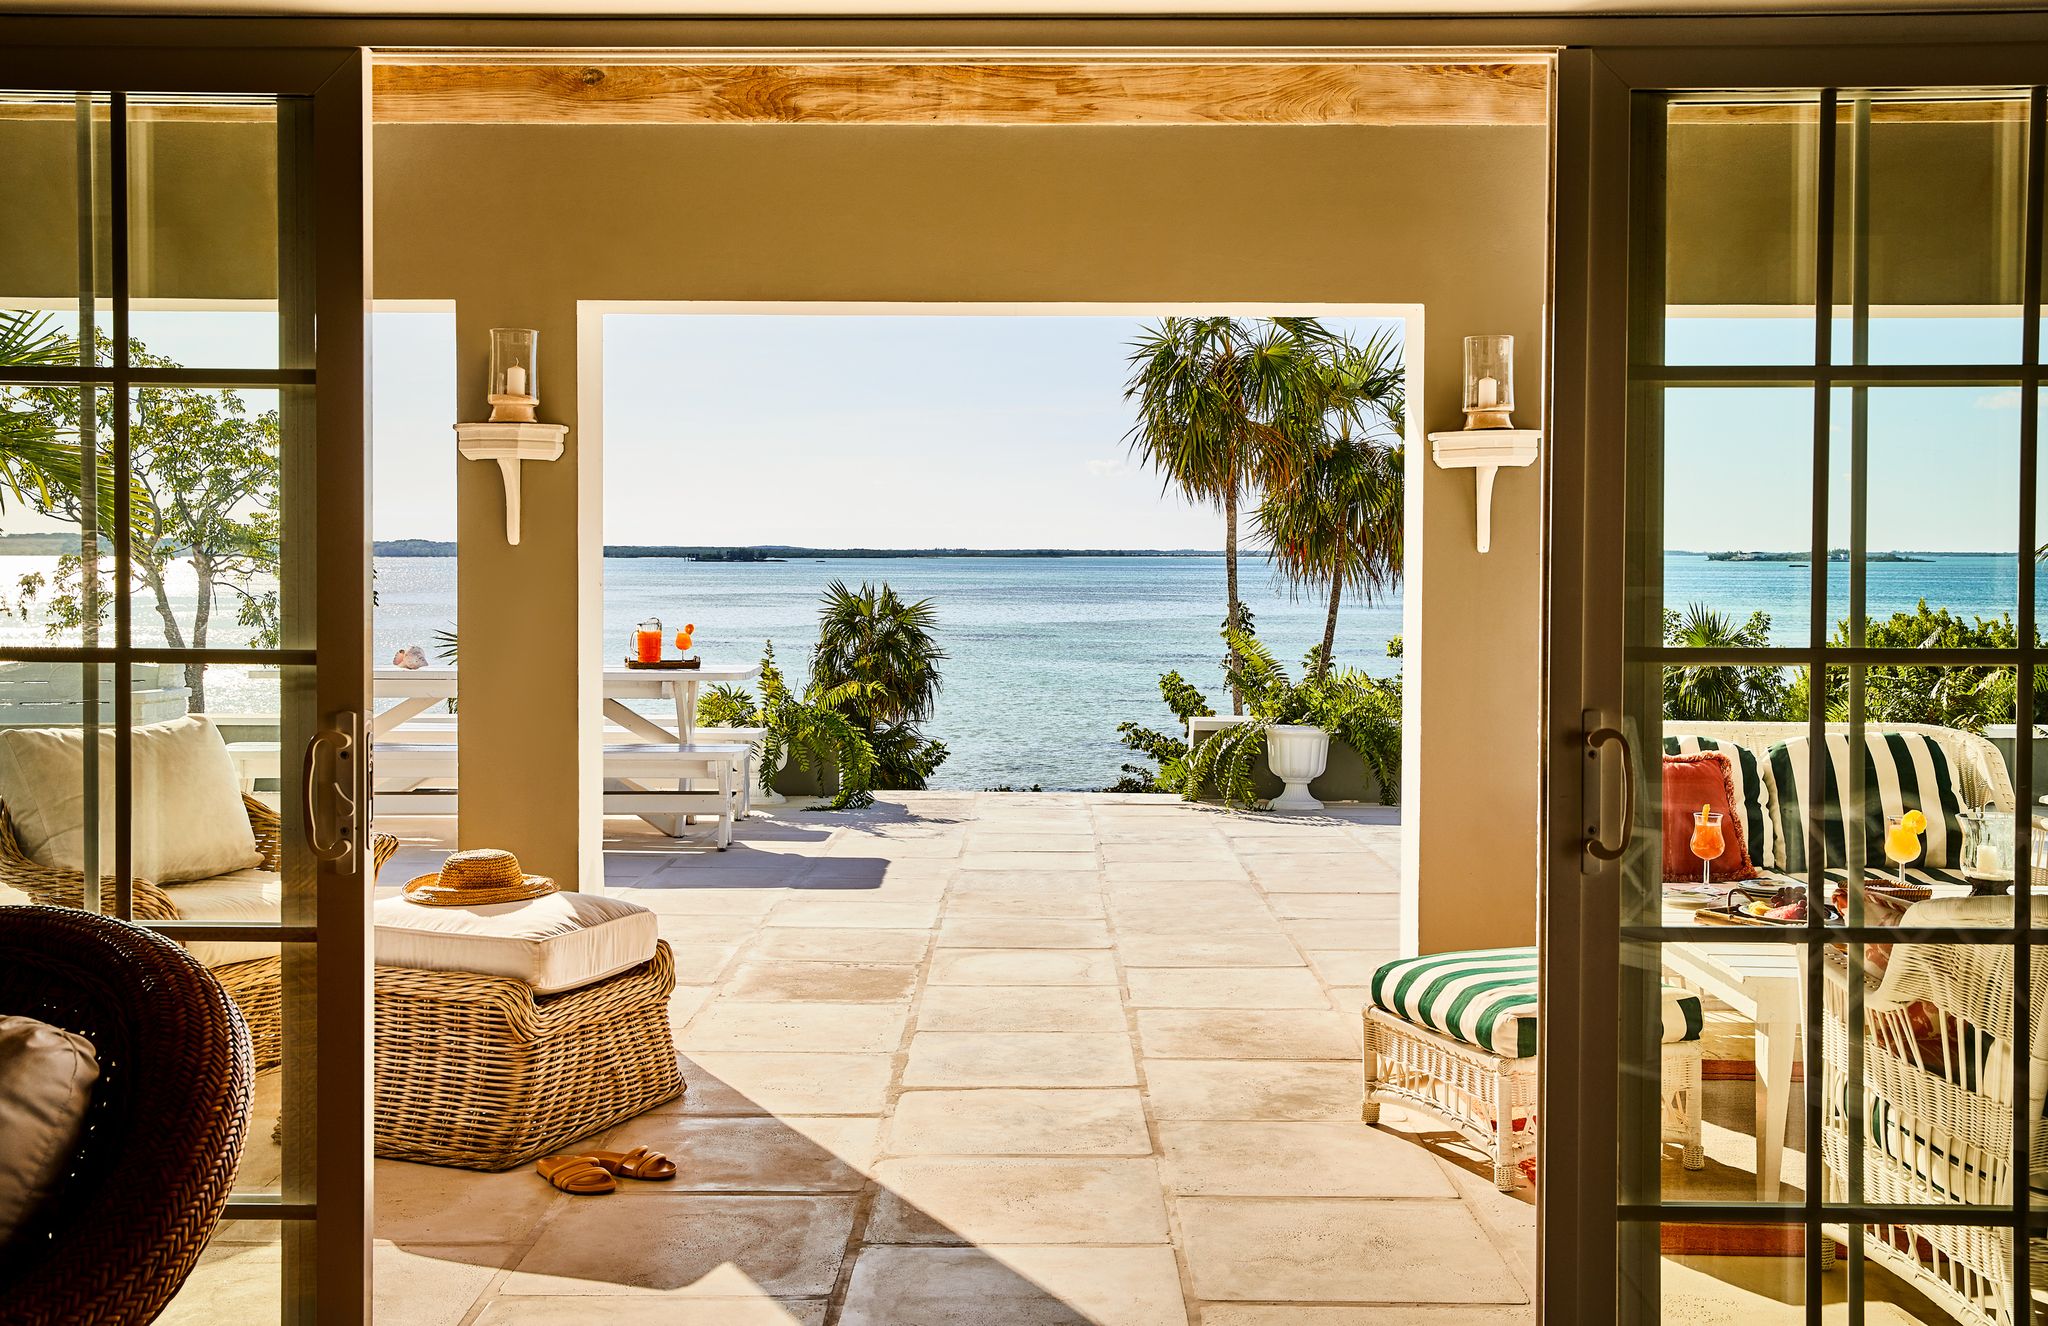 5 Ways to Transform Any Beach House into a Serene Tropical Oasis